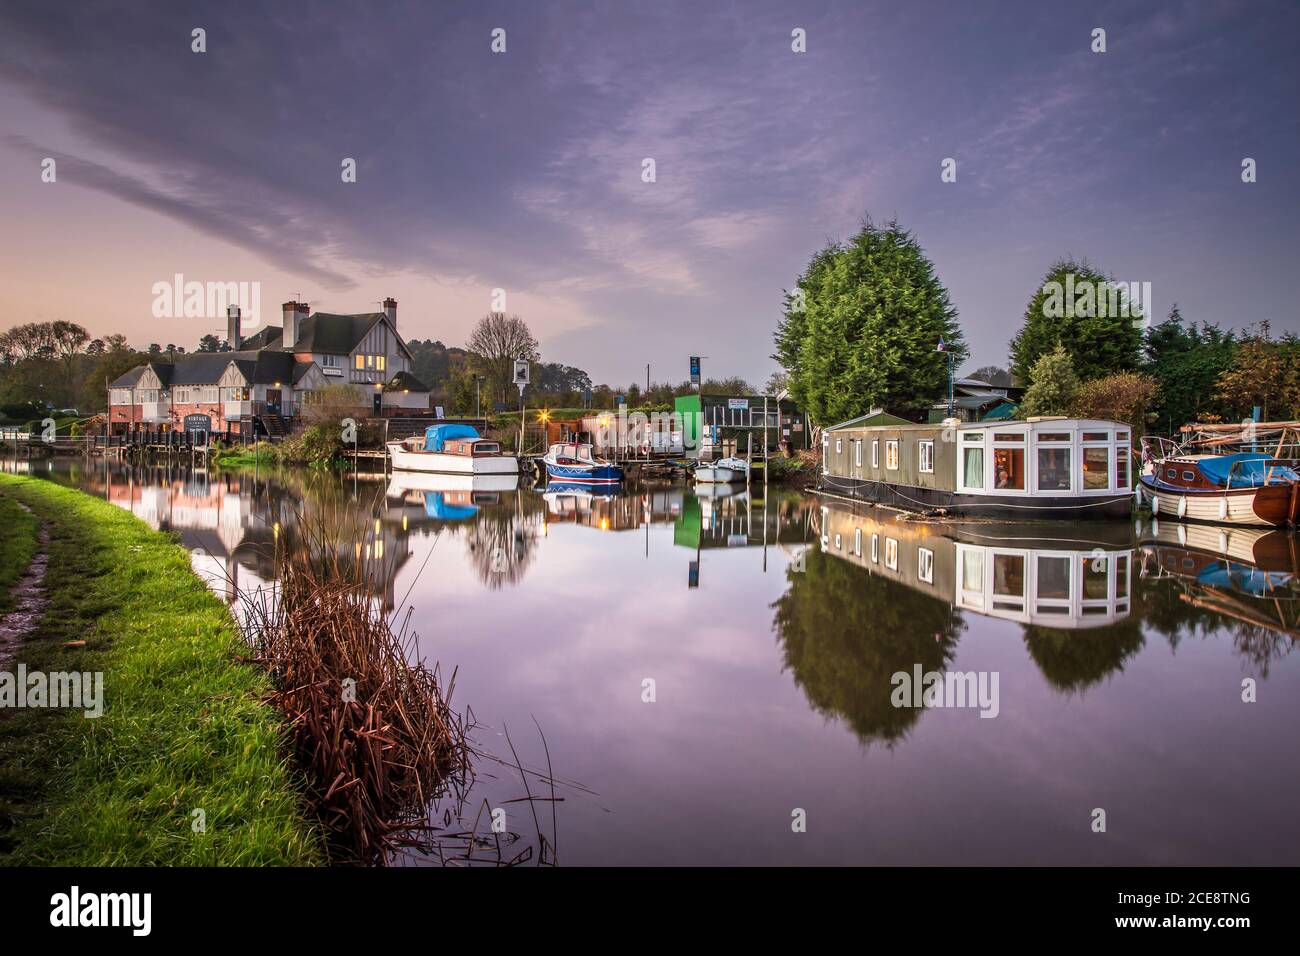 Houseboat on the river Soar with cruisers near The Otter pub and restaurant. Stock Photo